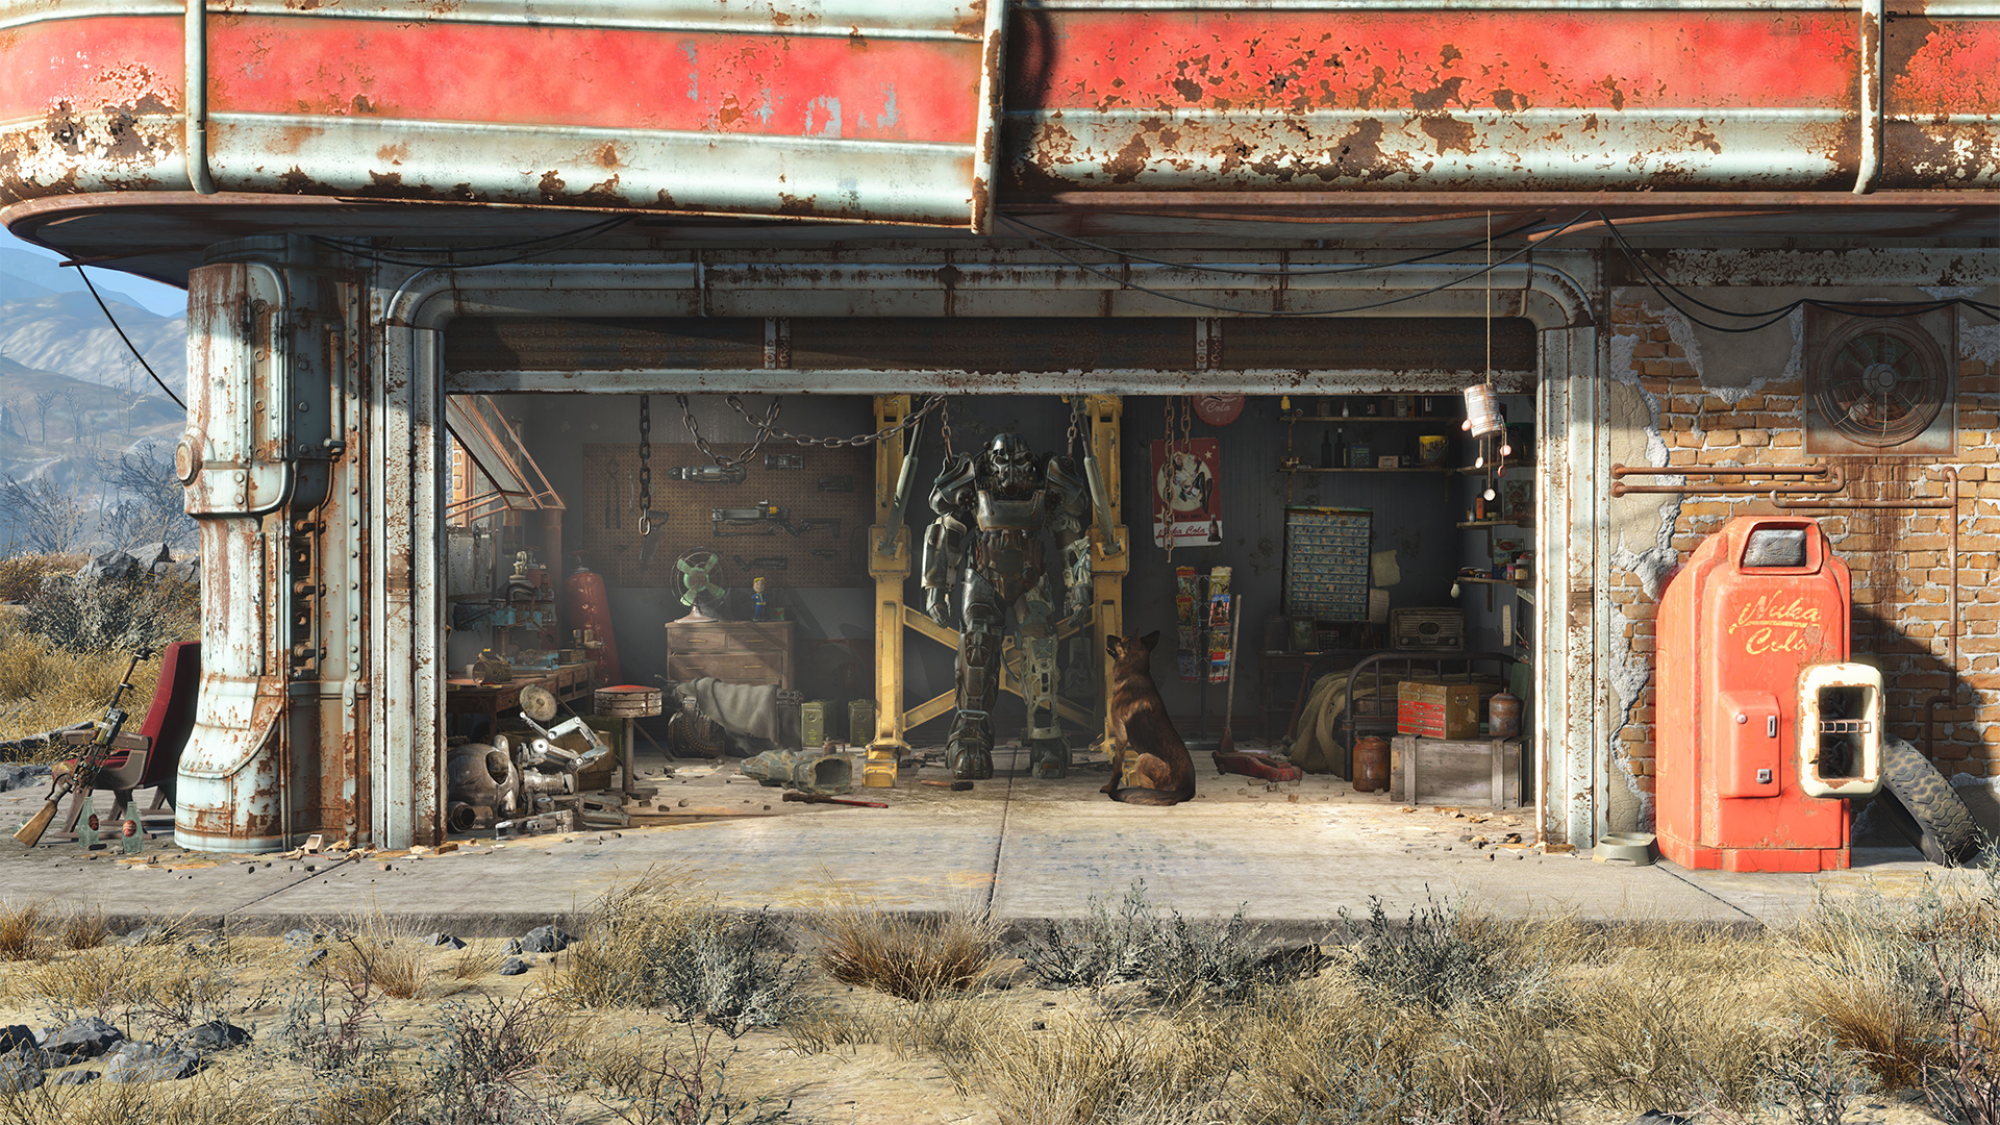 A rundown garage in a desolate landscape with a vintage gas pump outside and a power armor suit standing inside next to a dog.